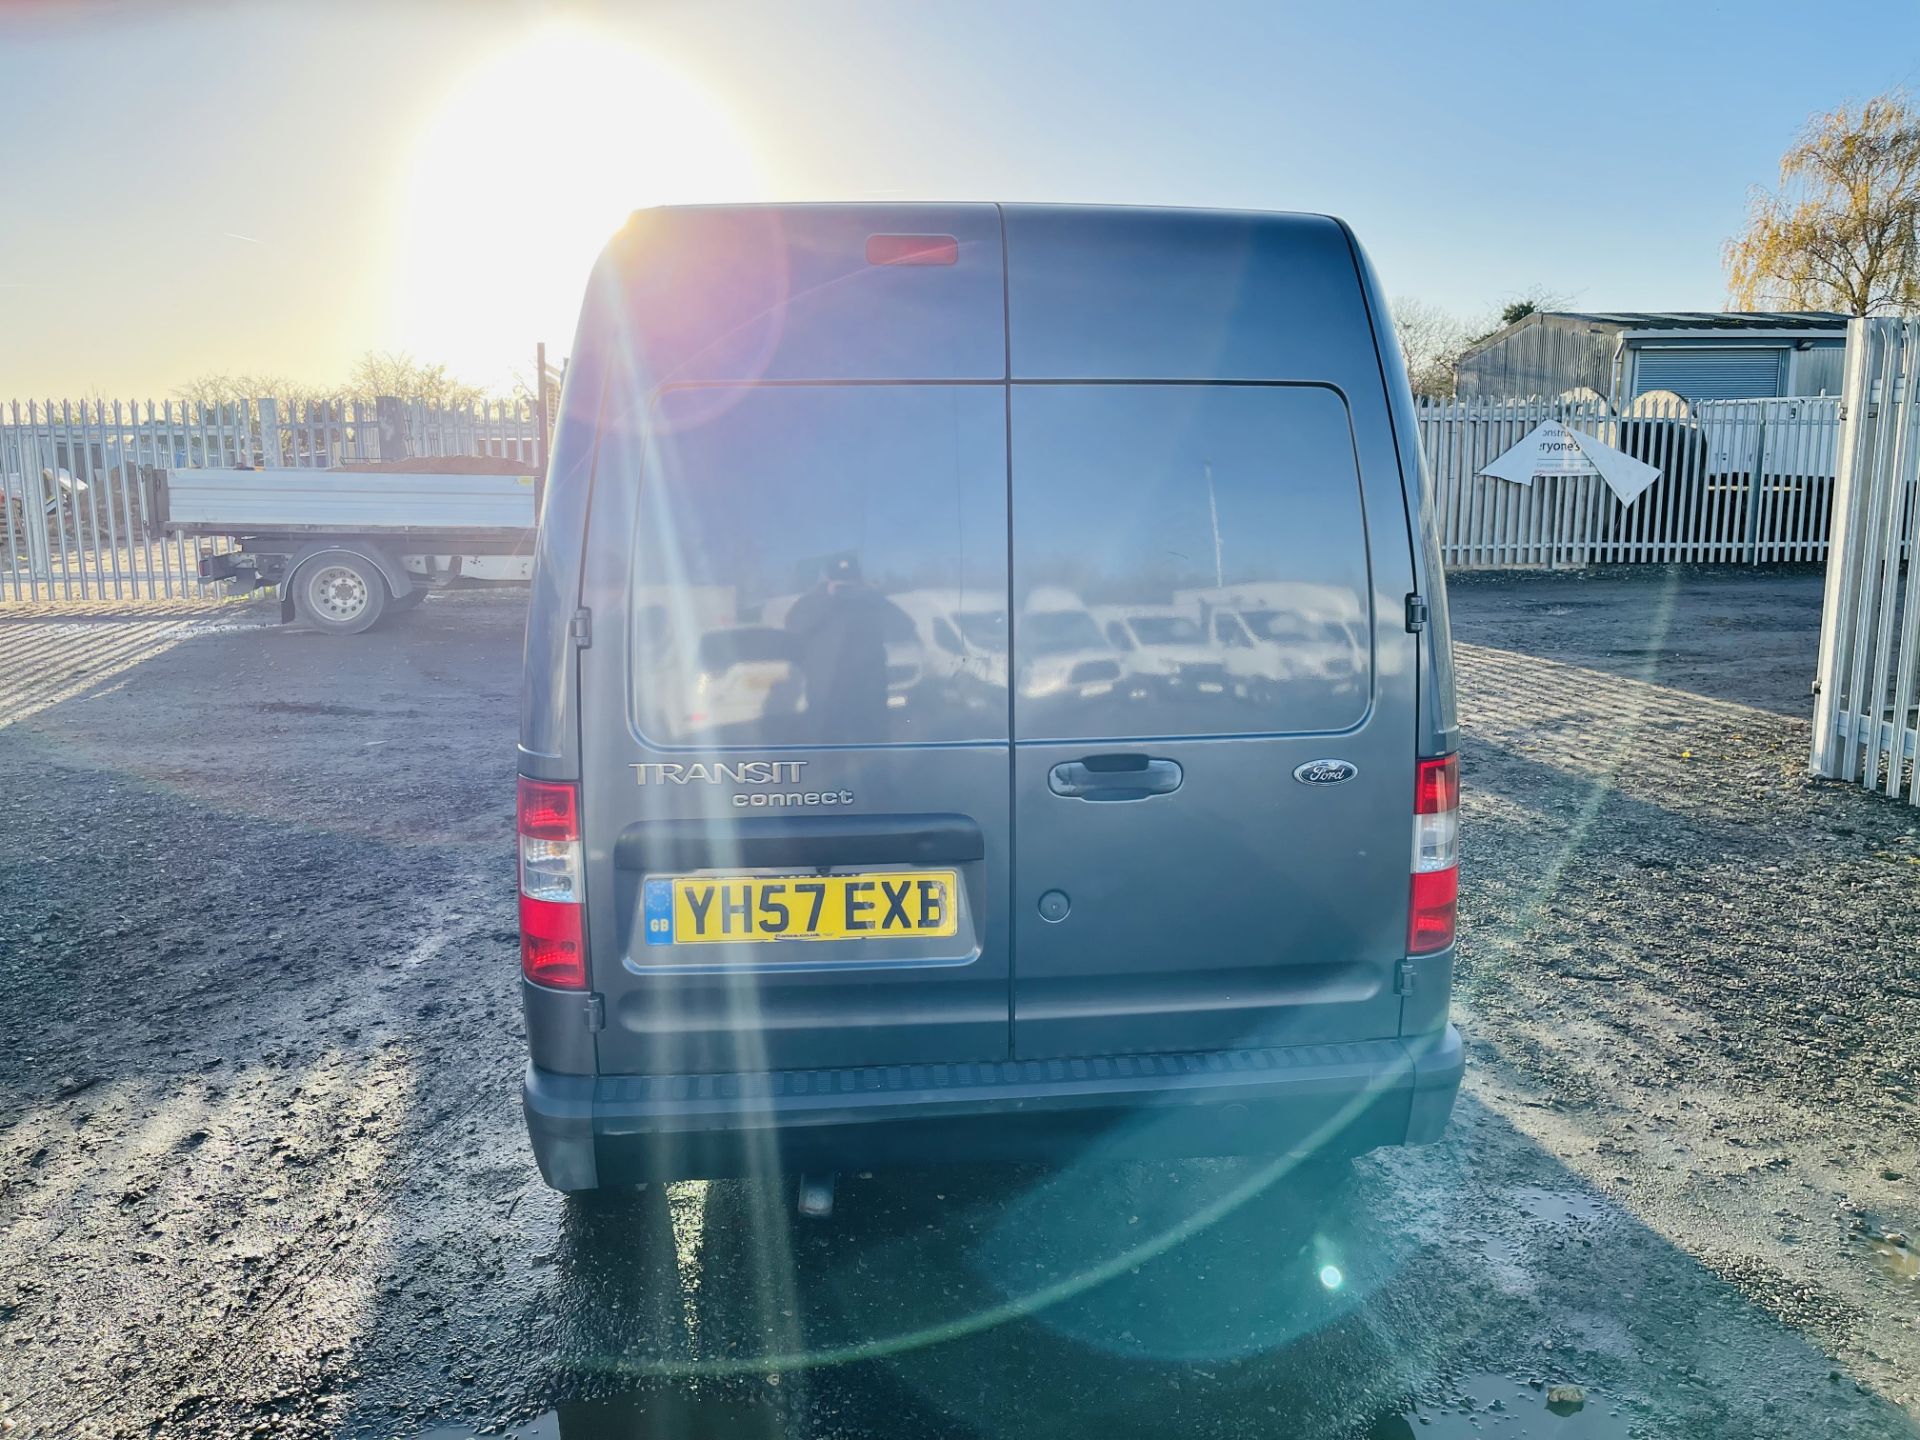 Ford Transit Connect 1.8 TDCI T230 LX110 LWB High Roof 2007 '57 Reg' A/C - No vat save 20% - Image 12 of 20